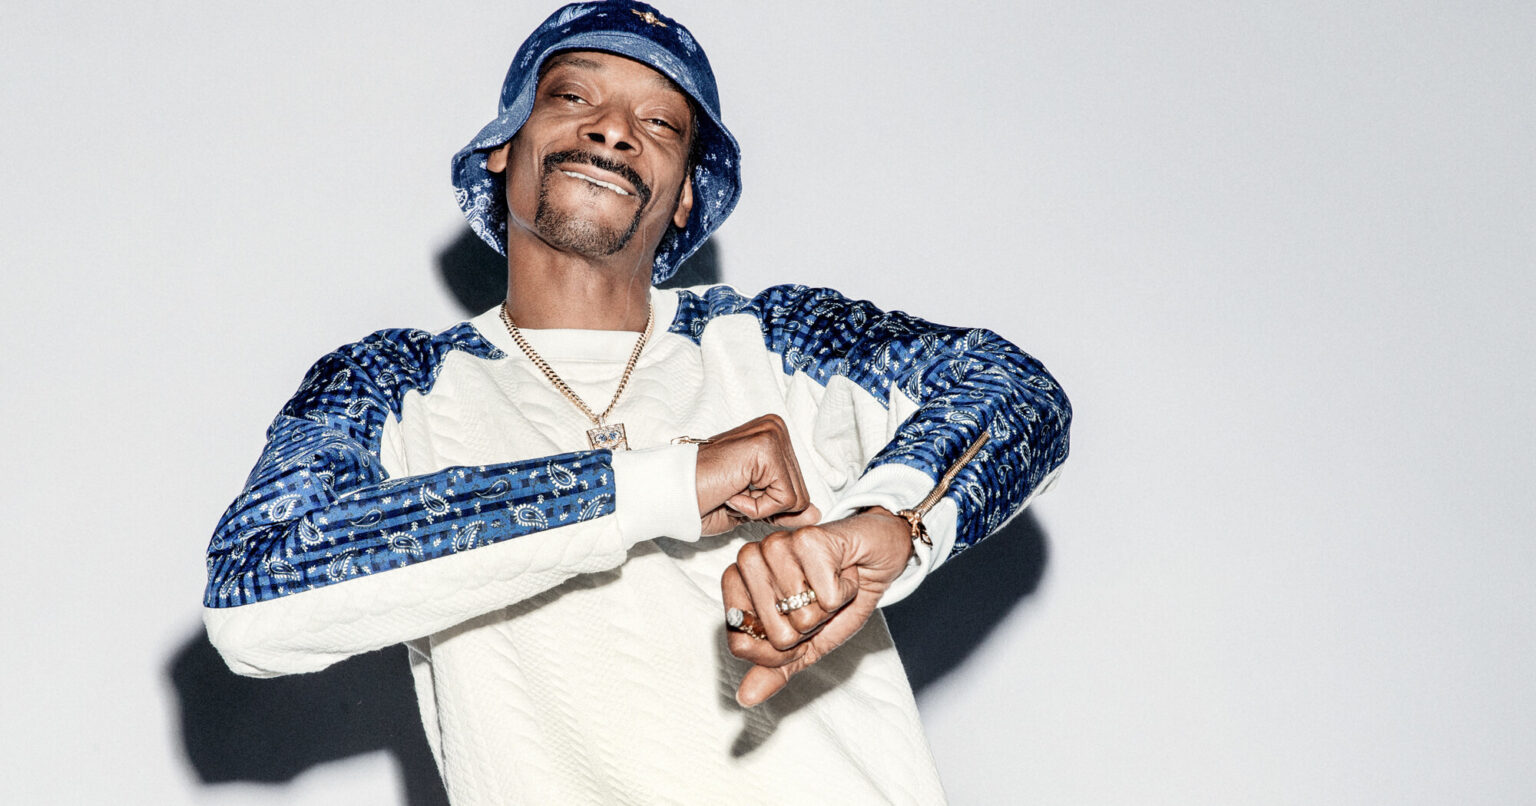 Snoop Dogg has been around for over three decades and isn't ready to quit yet. See how he grew his massive net worth.